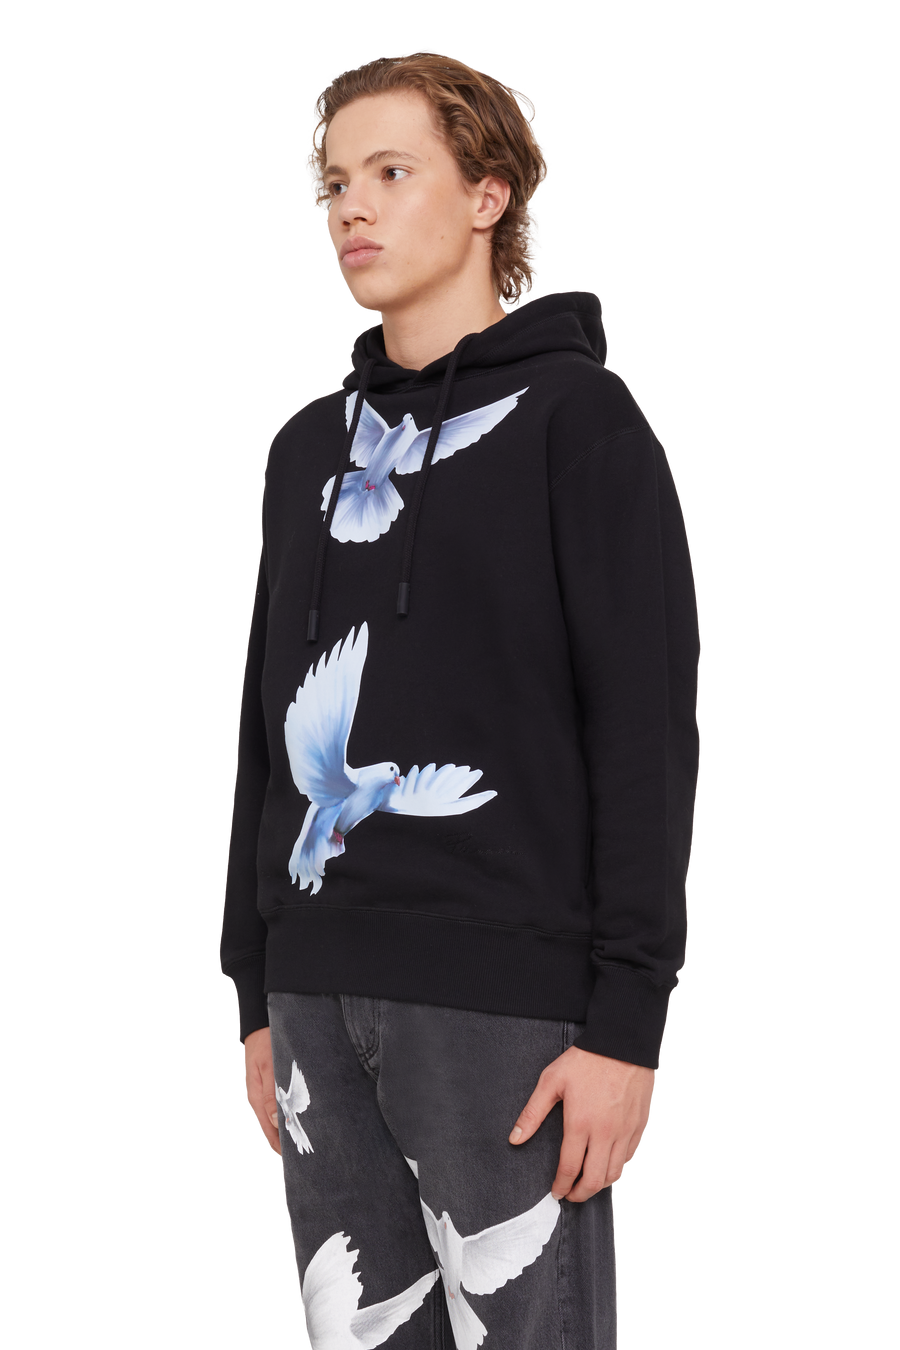 FREEDOM DOVES BLACK HOODED SWEATER